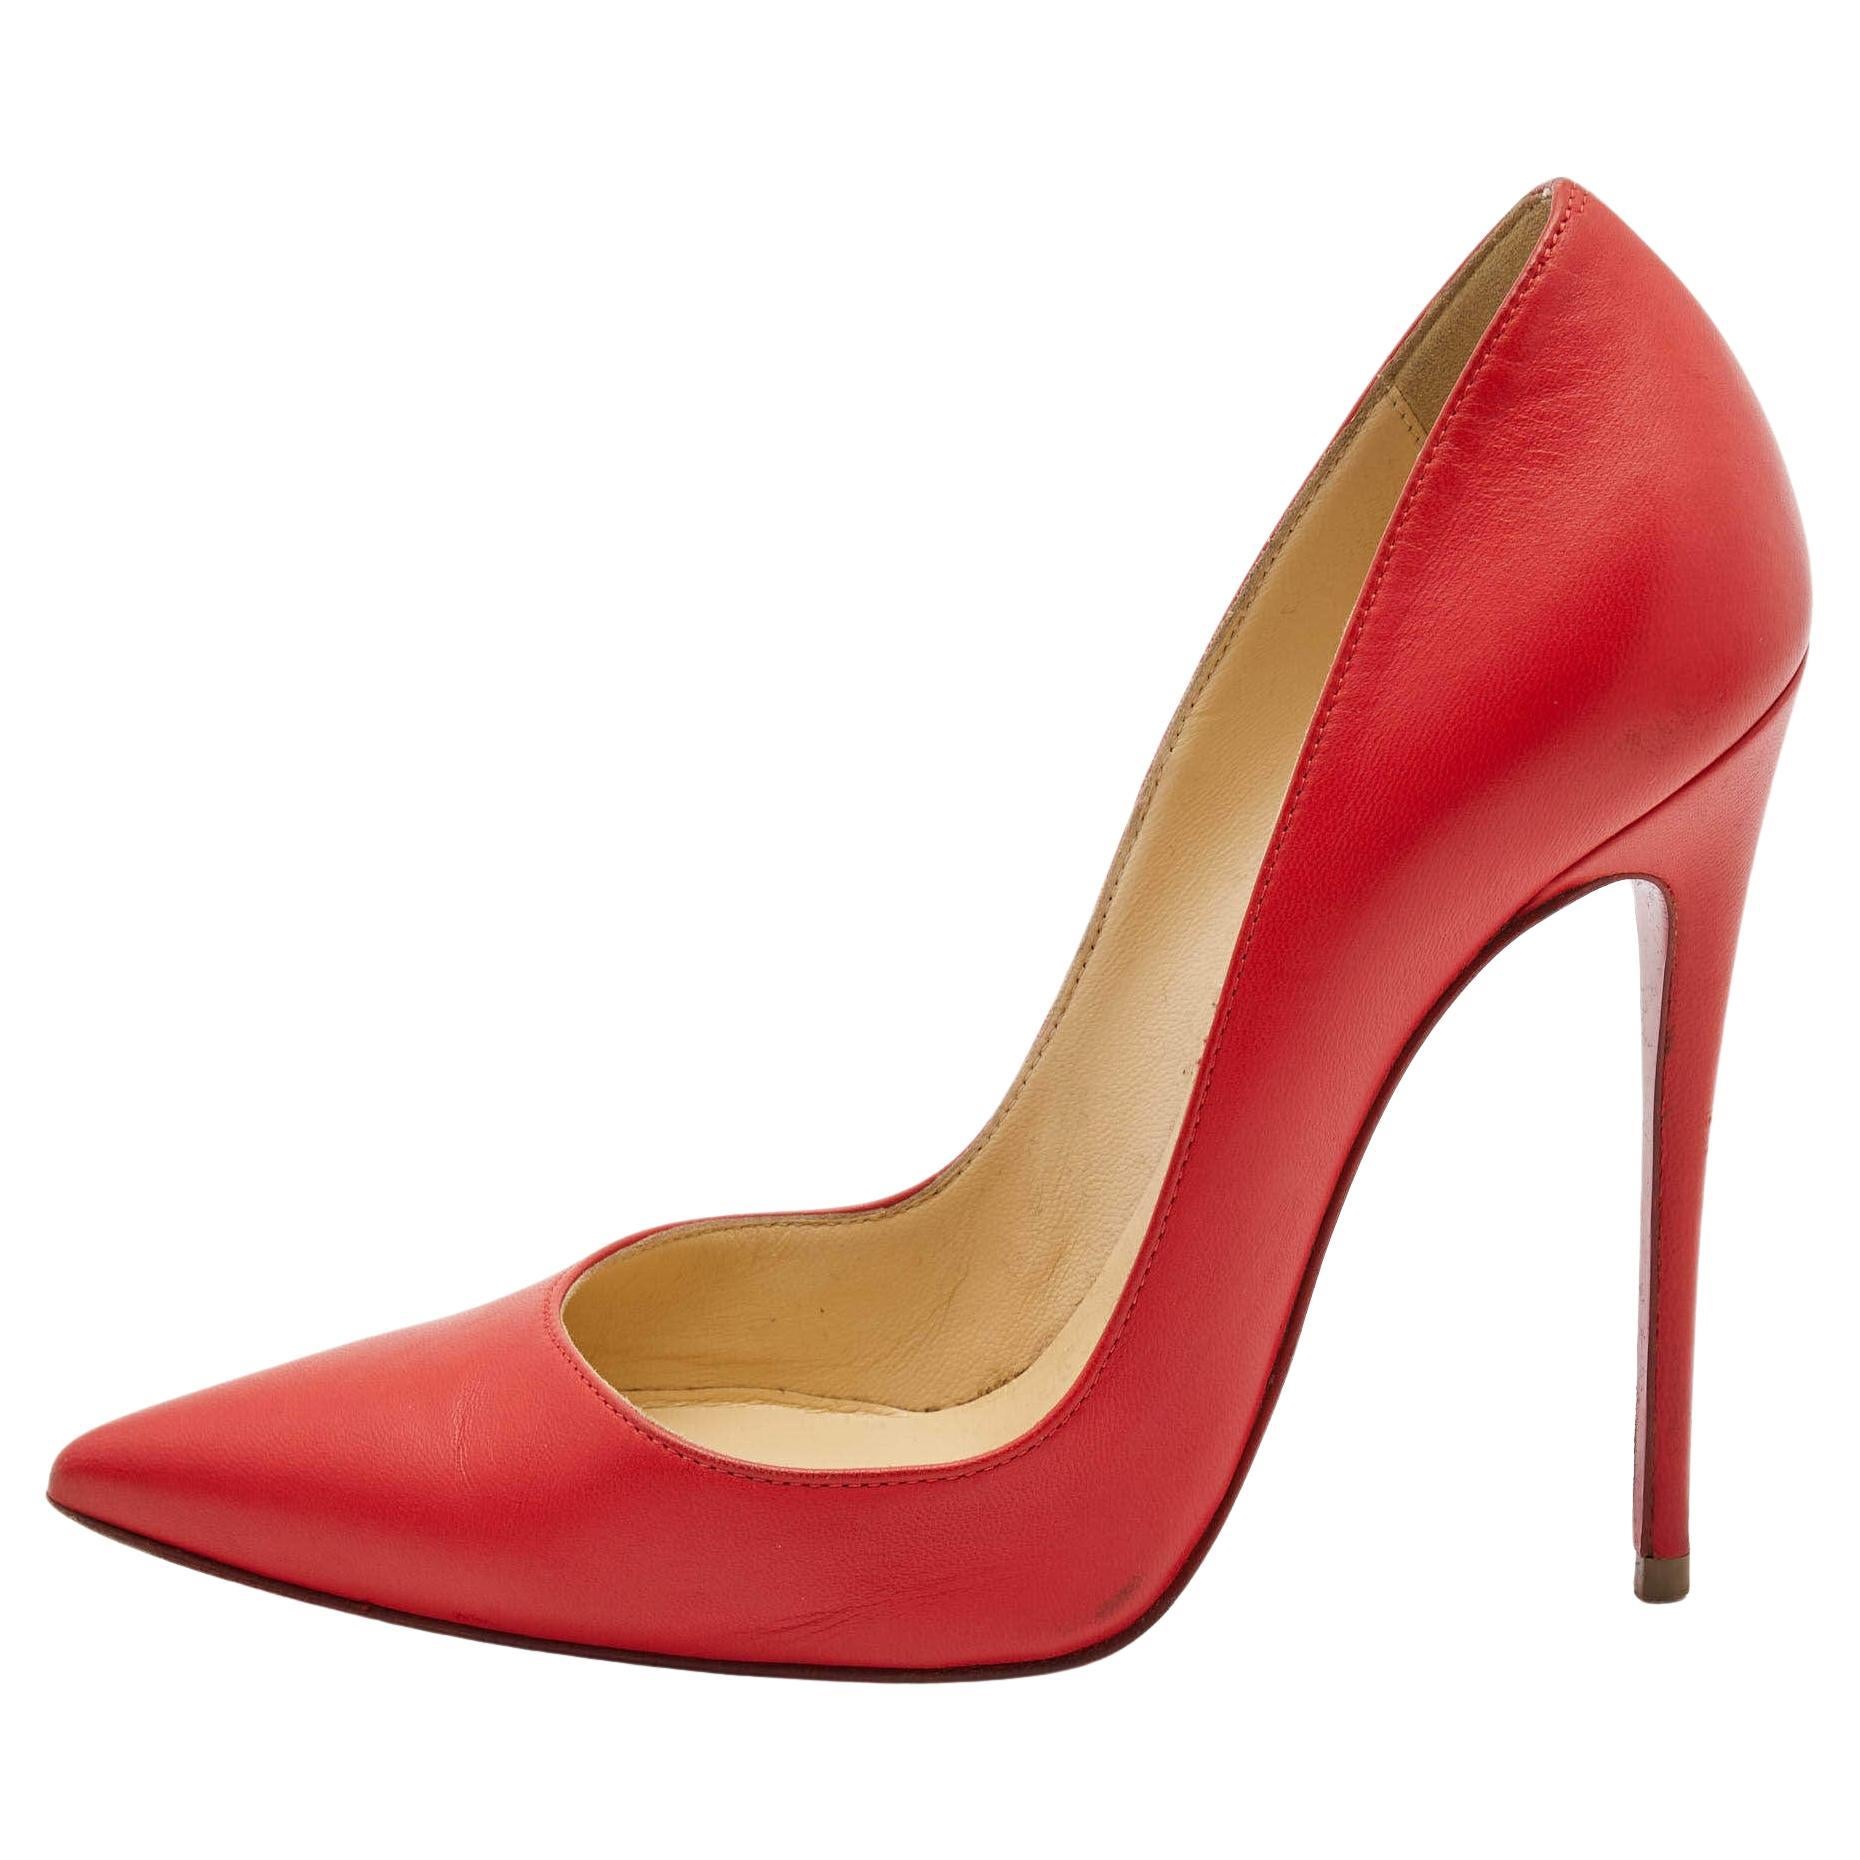 Christian Louboutin Red Leather So Kate Pointed Toe Pumps Size 37